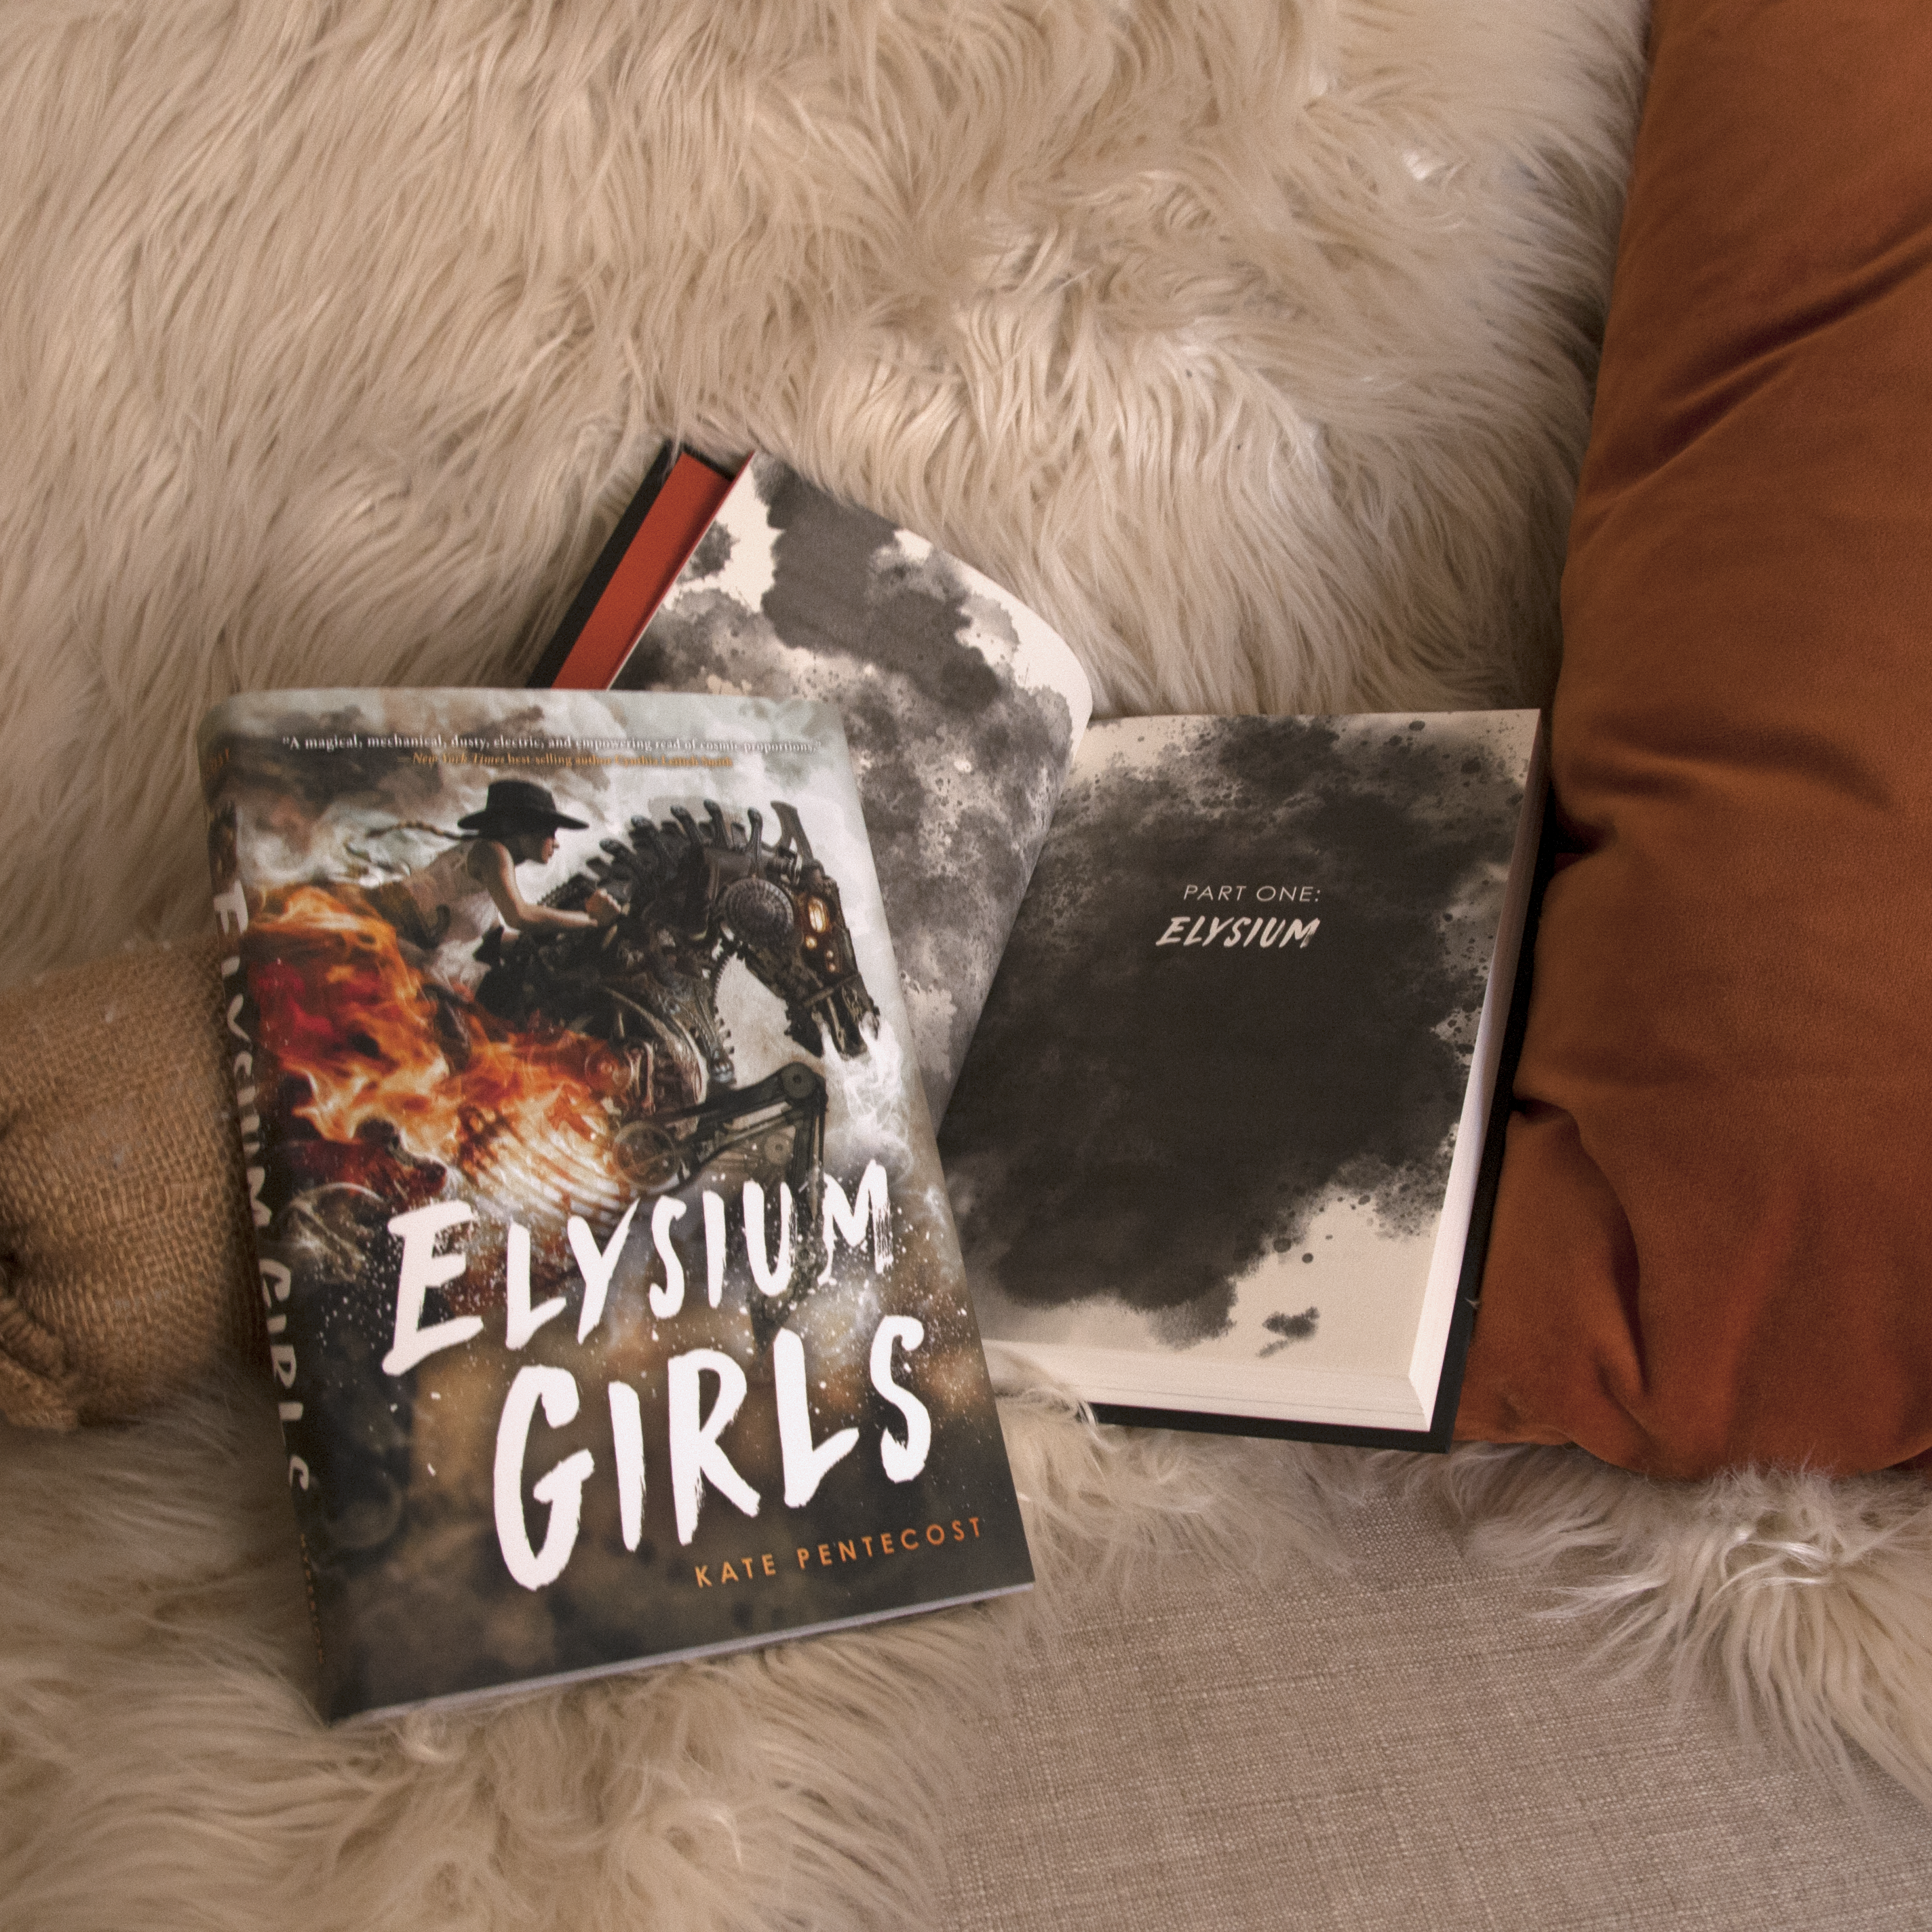 Image of the book "Elysium Girls" by Kate Pentecost